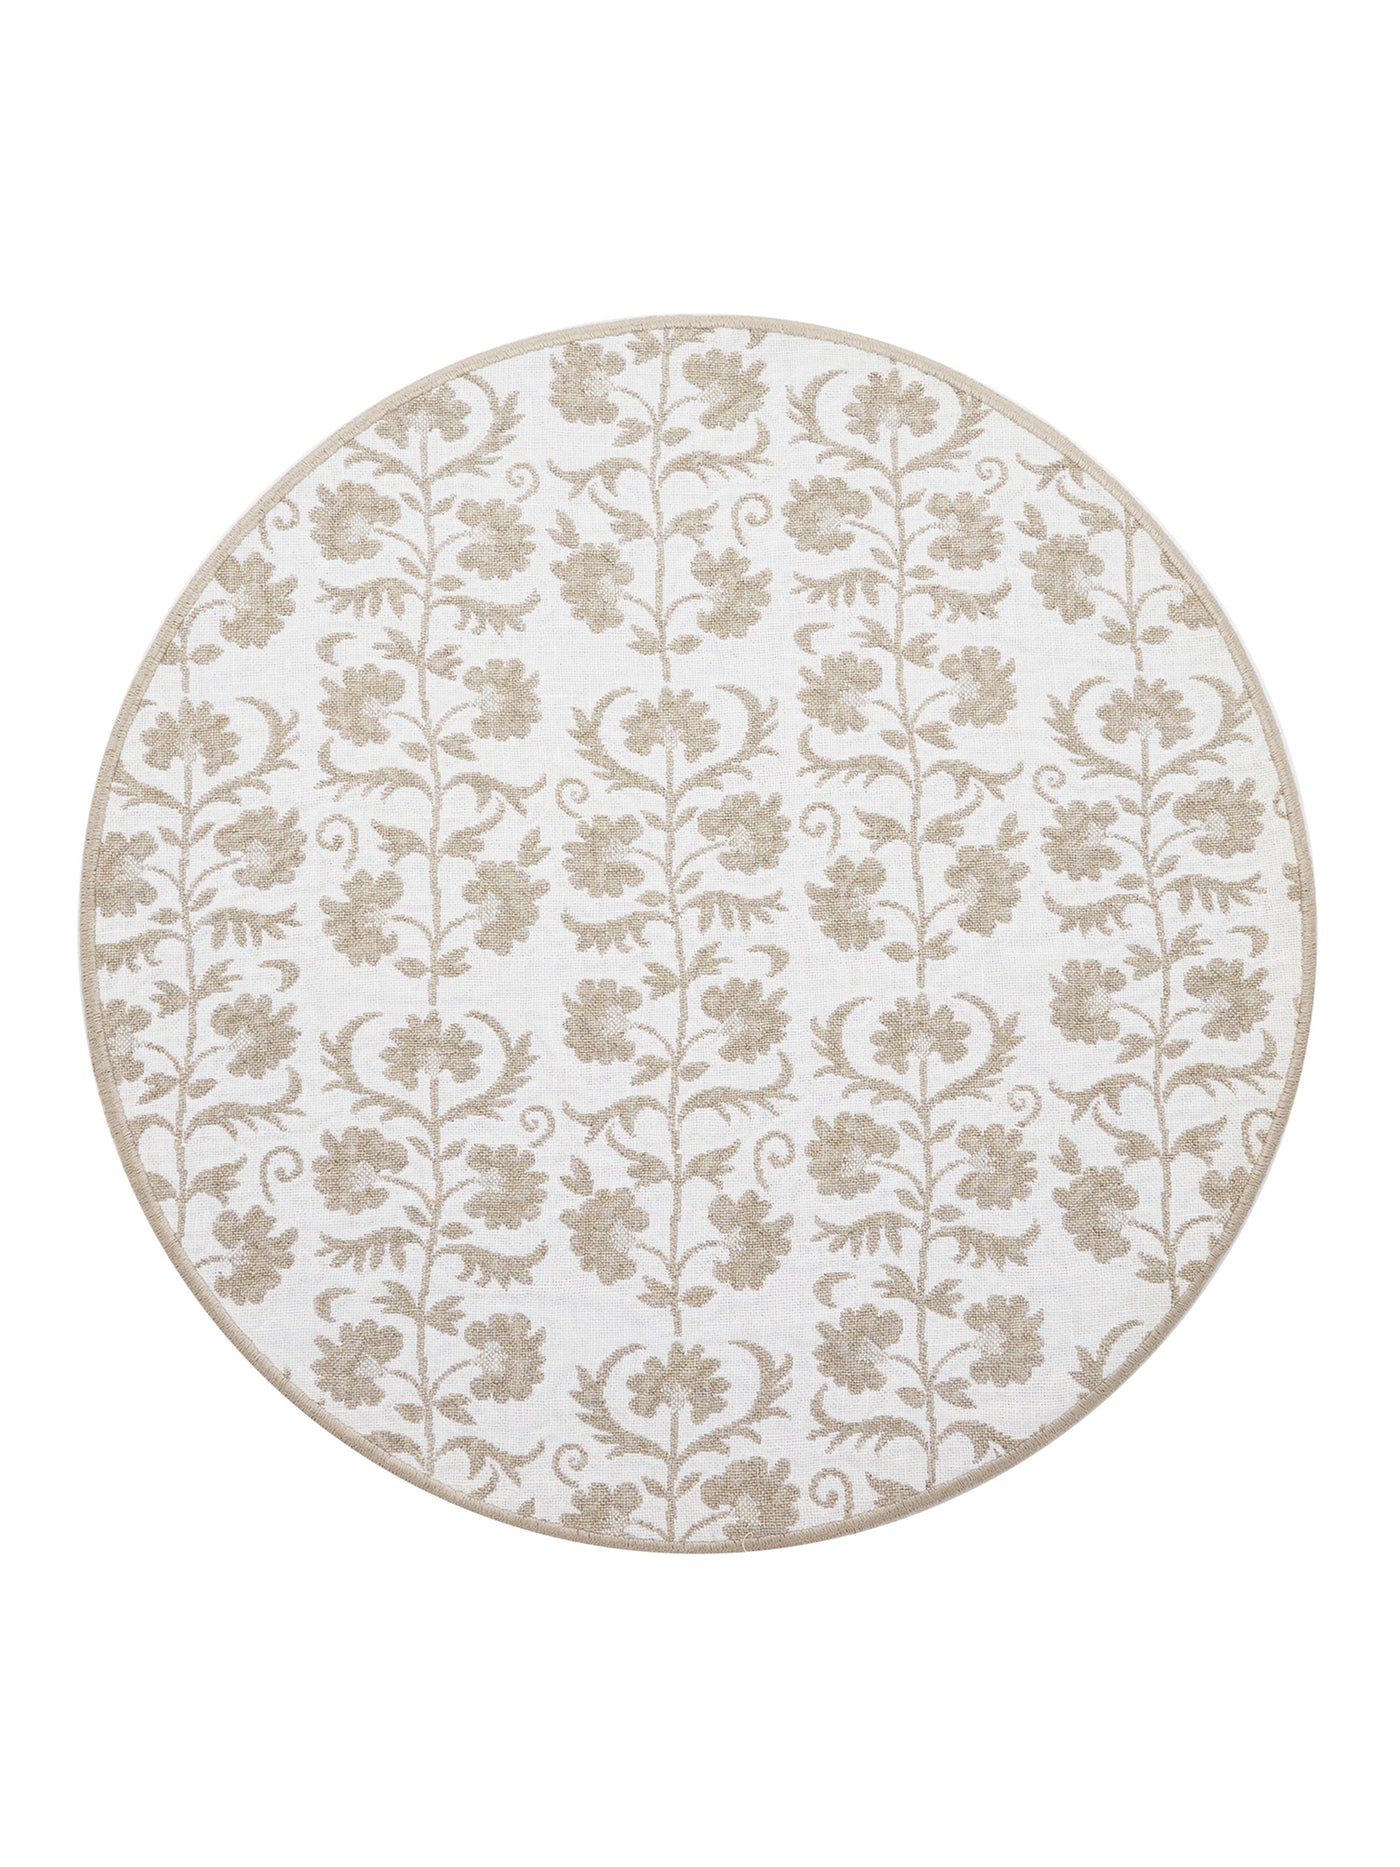 Italian Reversible Suzani Placemat Set in Ecru by Permanent Resident